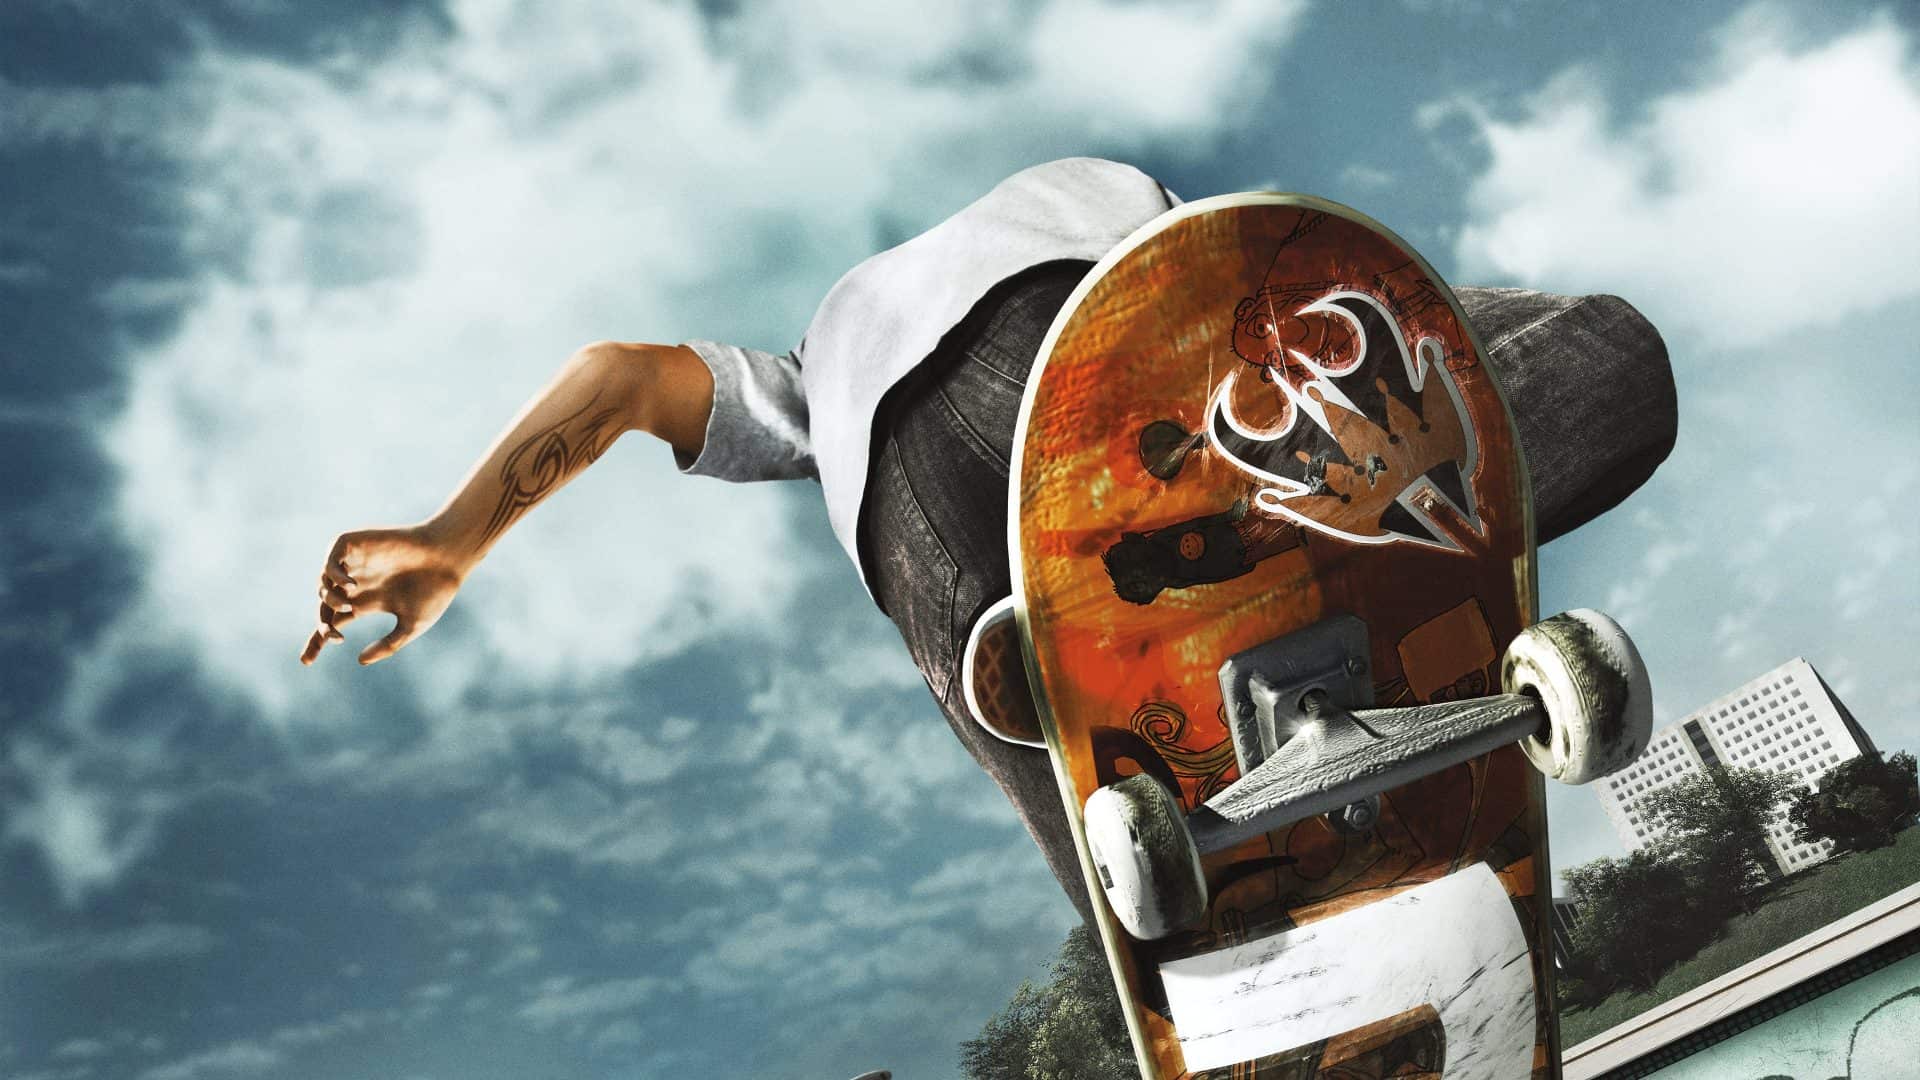 Skate 3 Cheats Codes – February 2023 (Complete List) « Gaming Guides